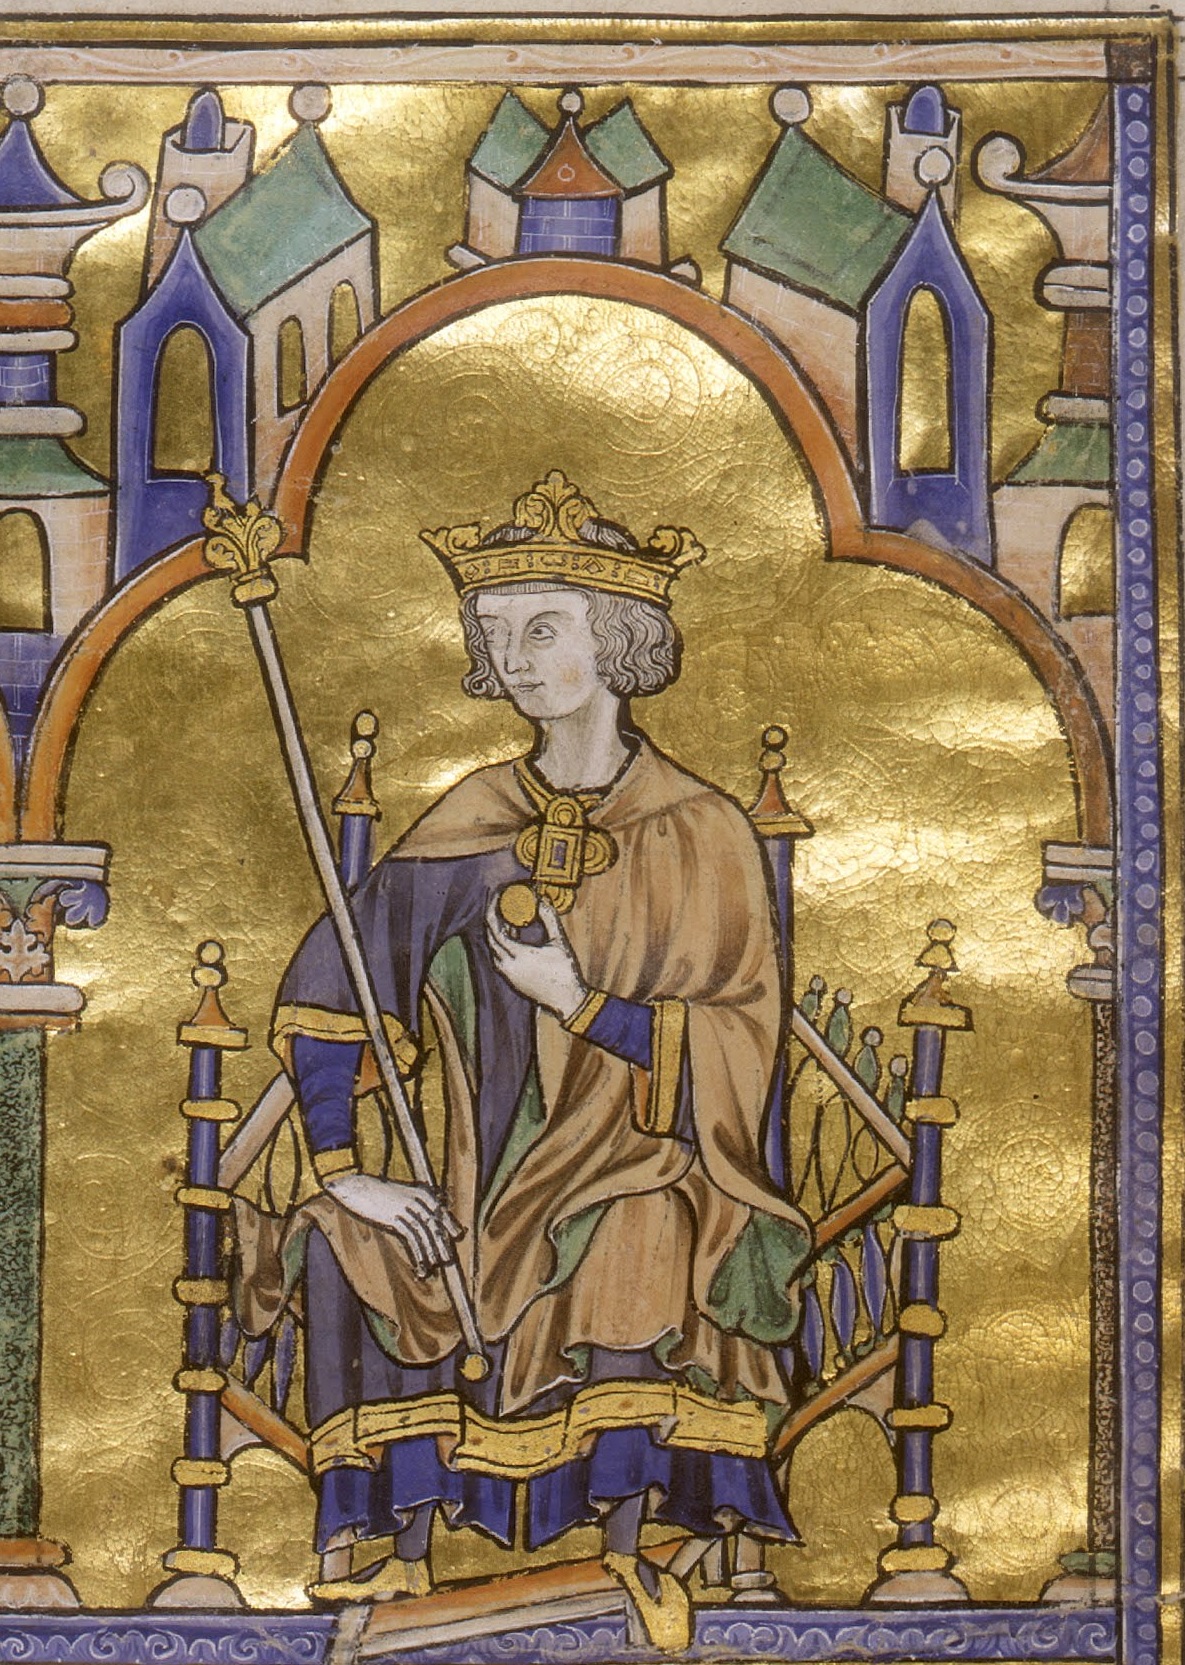 History of St. Louis IX reveals love for poor, justice — and a defeder of  the Christian faith, Articles